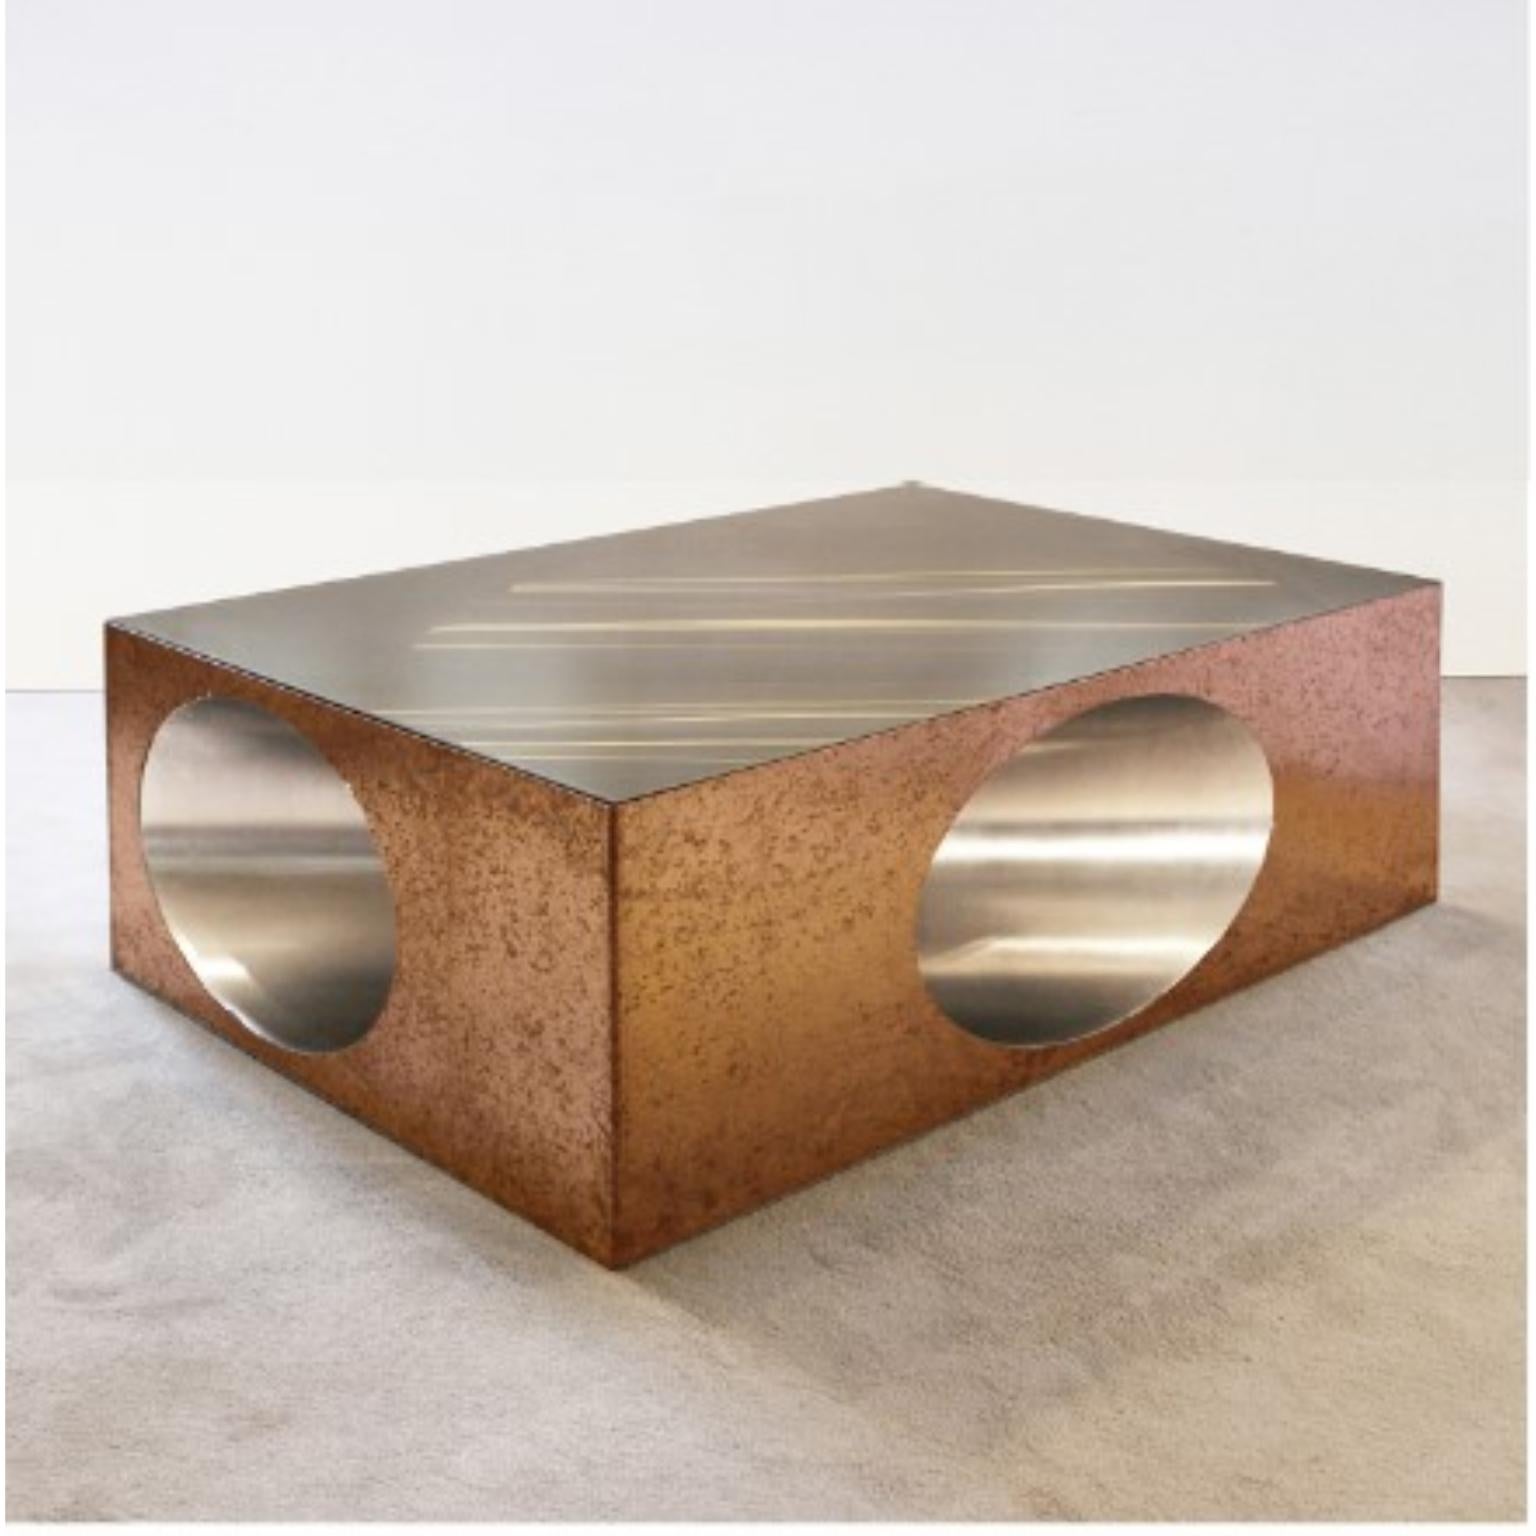 Hol-low table by Christian Zahr
Dimensions: W 120 x D 80 x H 40 cm
Materials: Copper- copper tin lined inside- tainted glass

Each Piece is Handmade.

Christian Zahr studied architecture at the Academie Libanaise des Beaux Arts, Beirut,